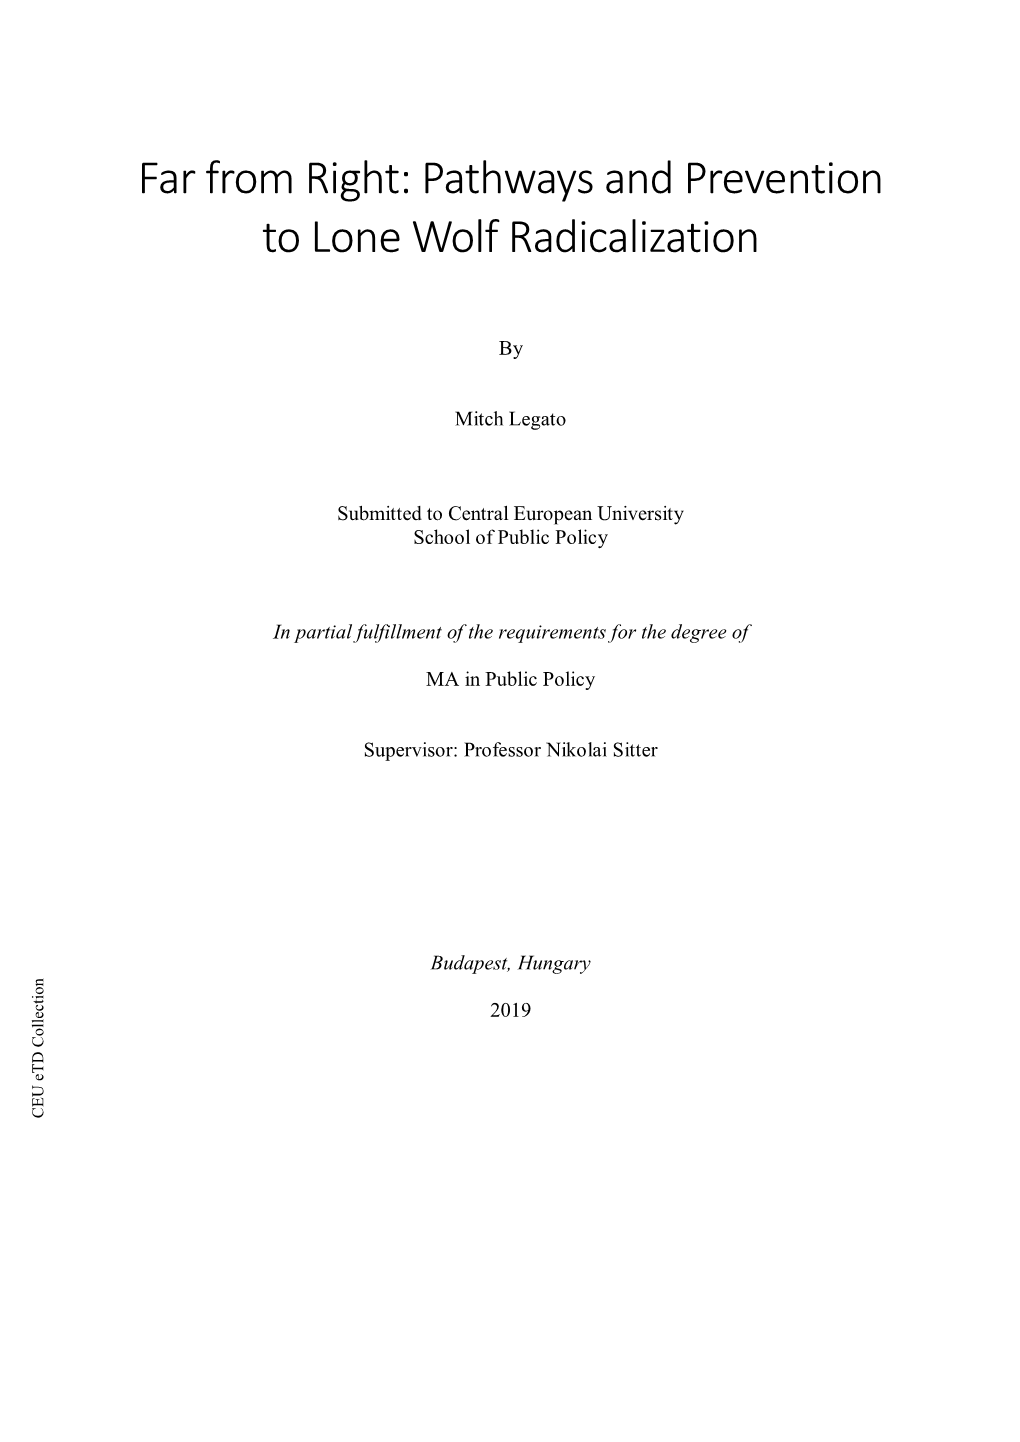 Pathways and Prevention to Lone Wolf Radicalization